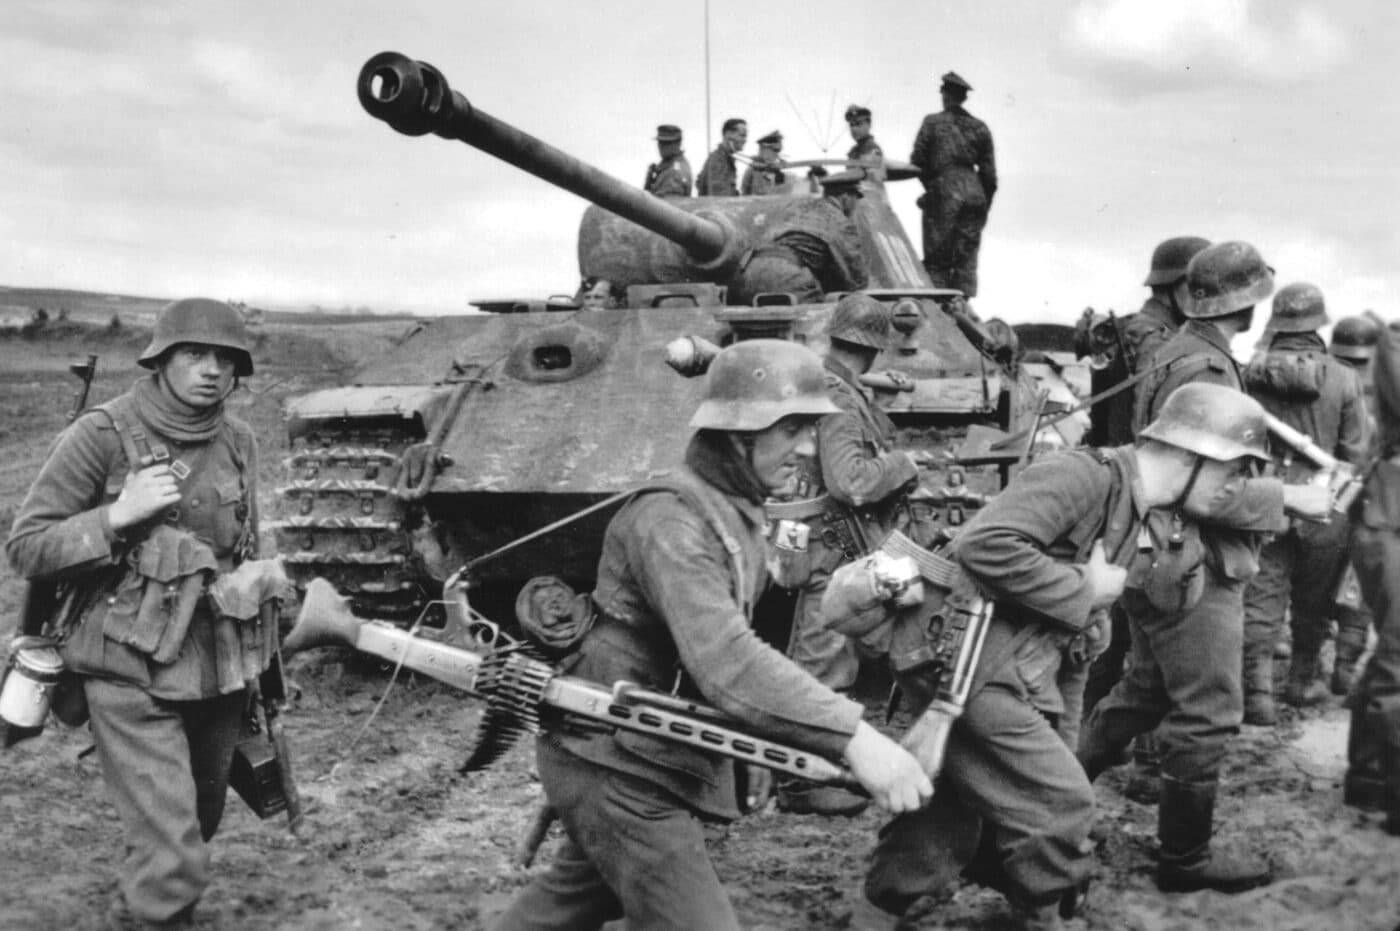 StG 44 Carried by German troops near a Panther tank